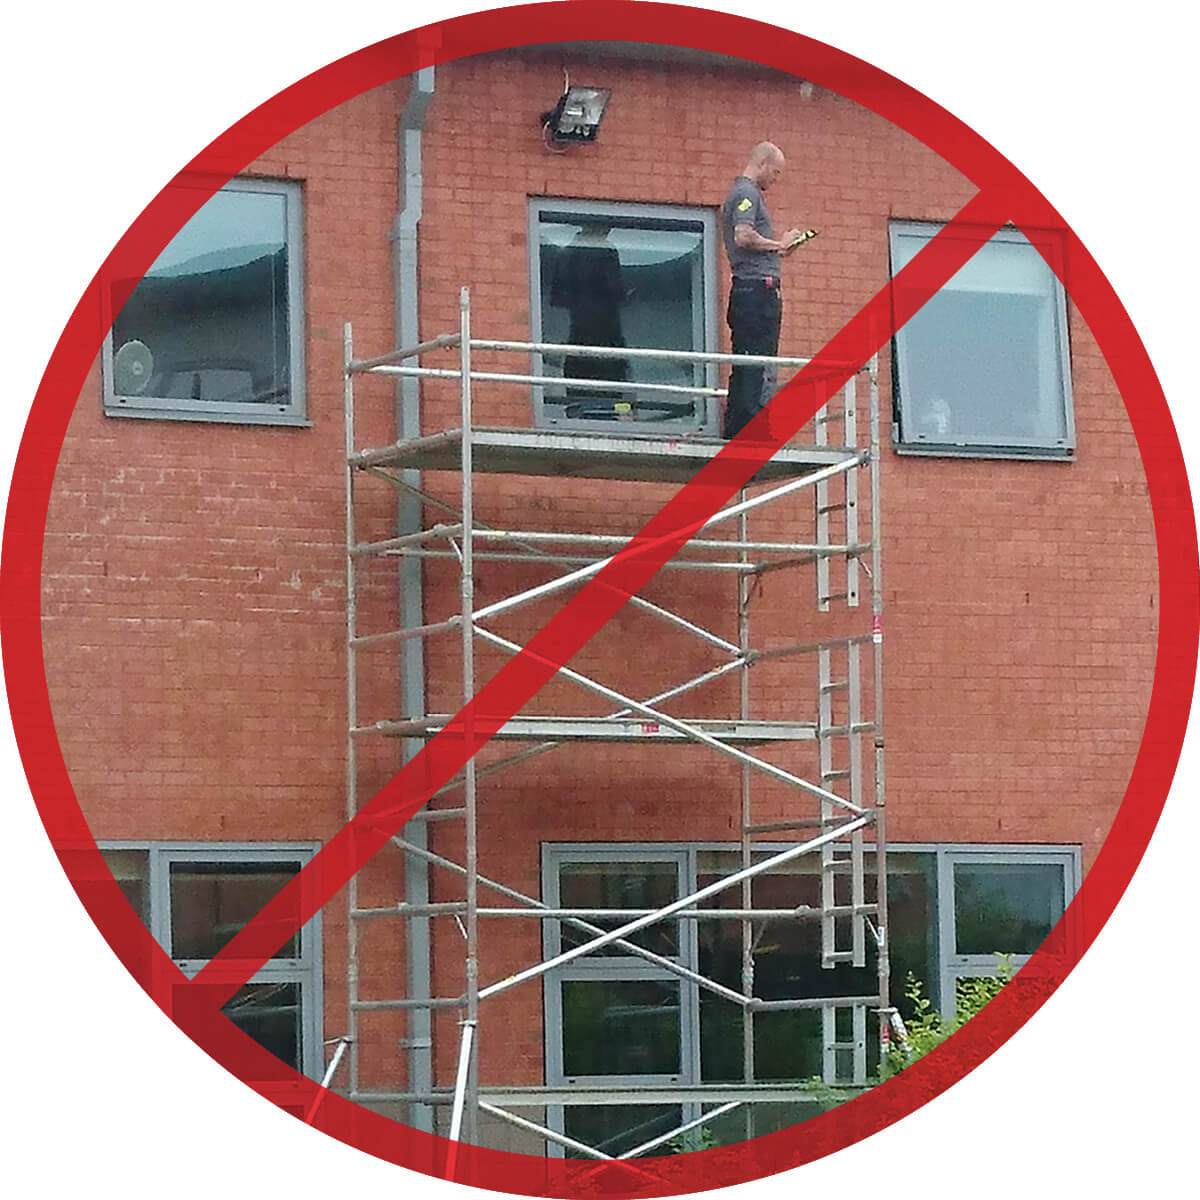 Working at Height – WHAT NOT TO DO